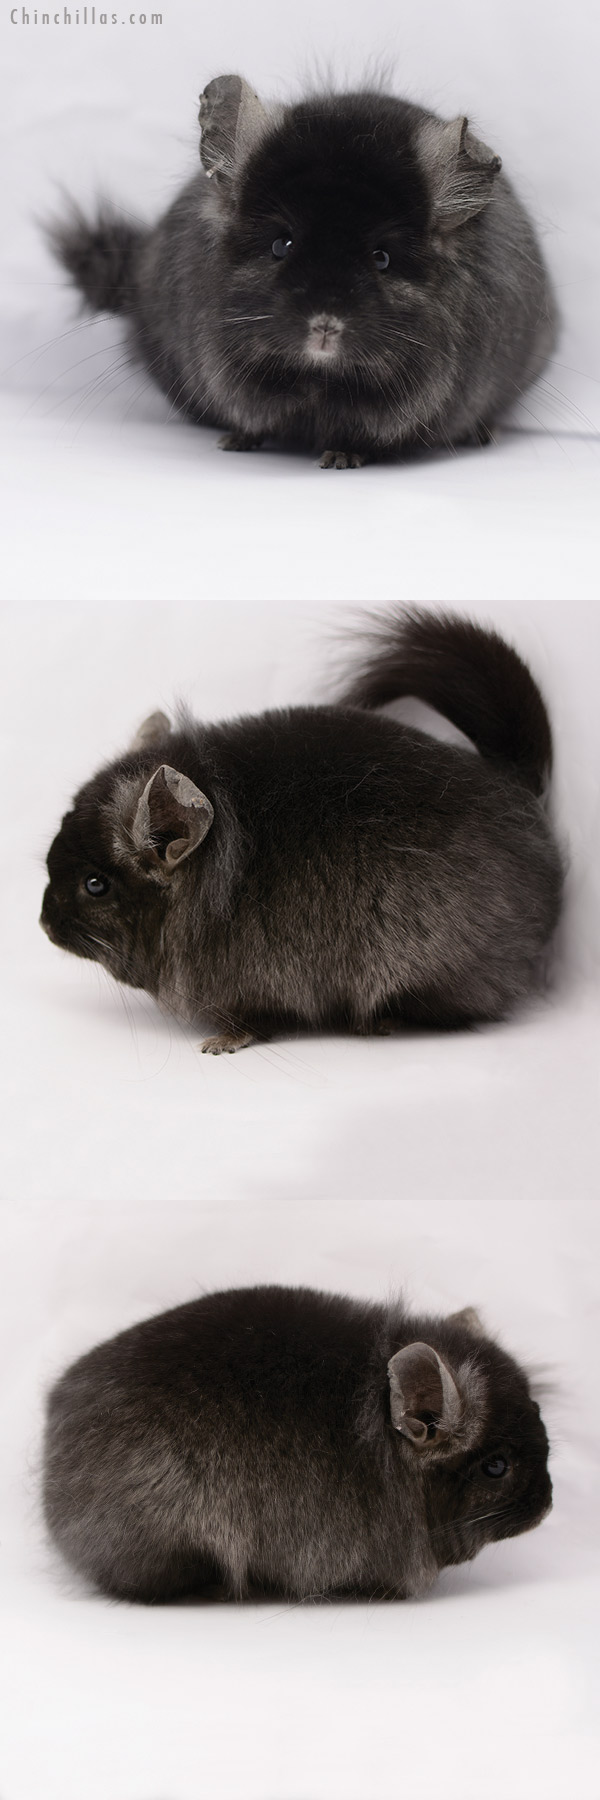 Chinchilla or related item offered for sale or export on Chinchillas.com - 20169 Exceptional Ebony  Royal Persian Angora Female Chinchilla